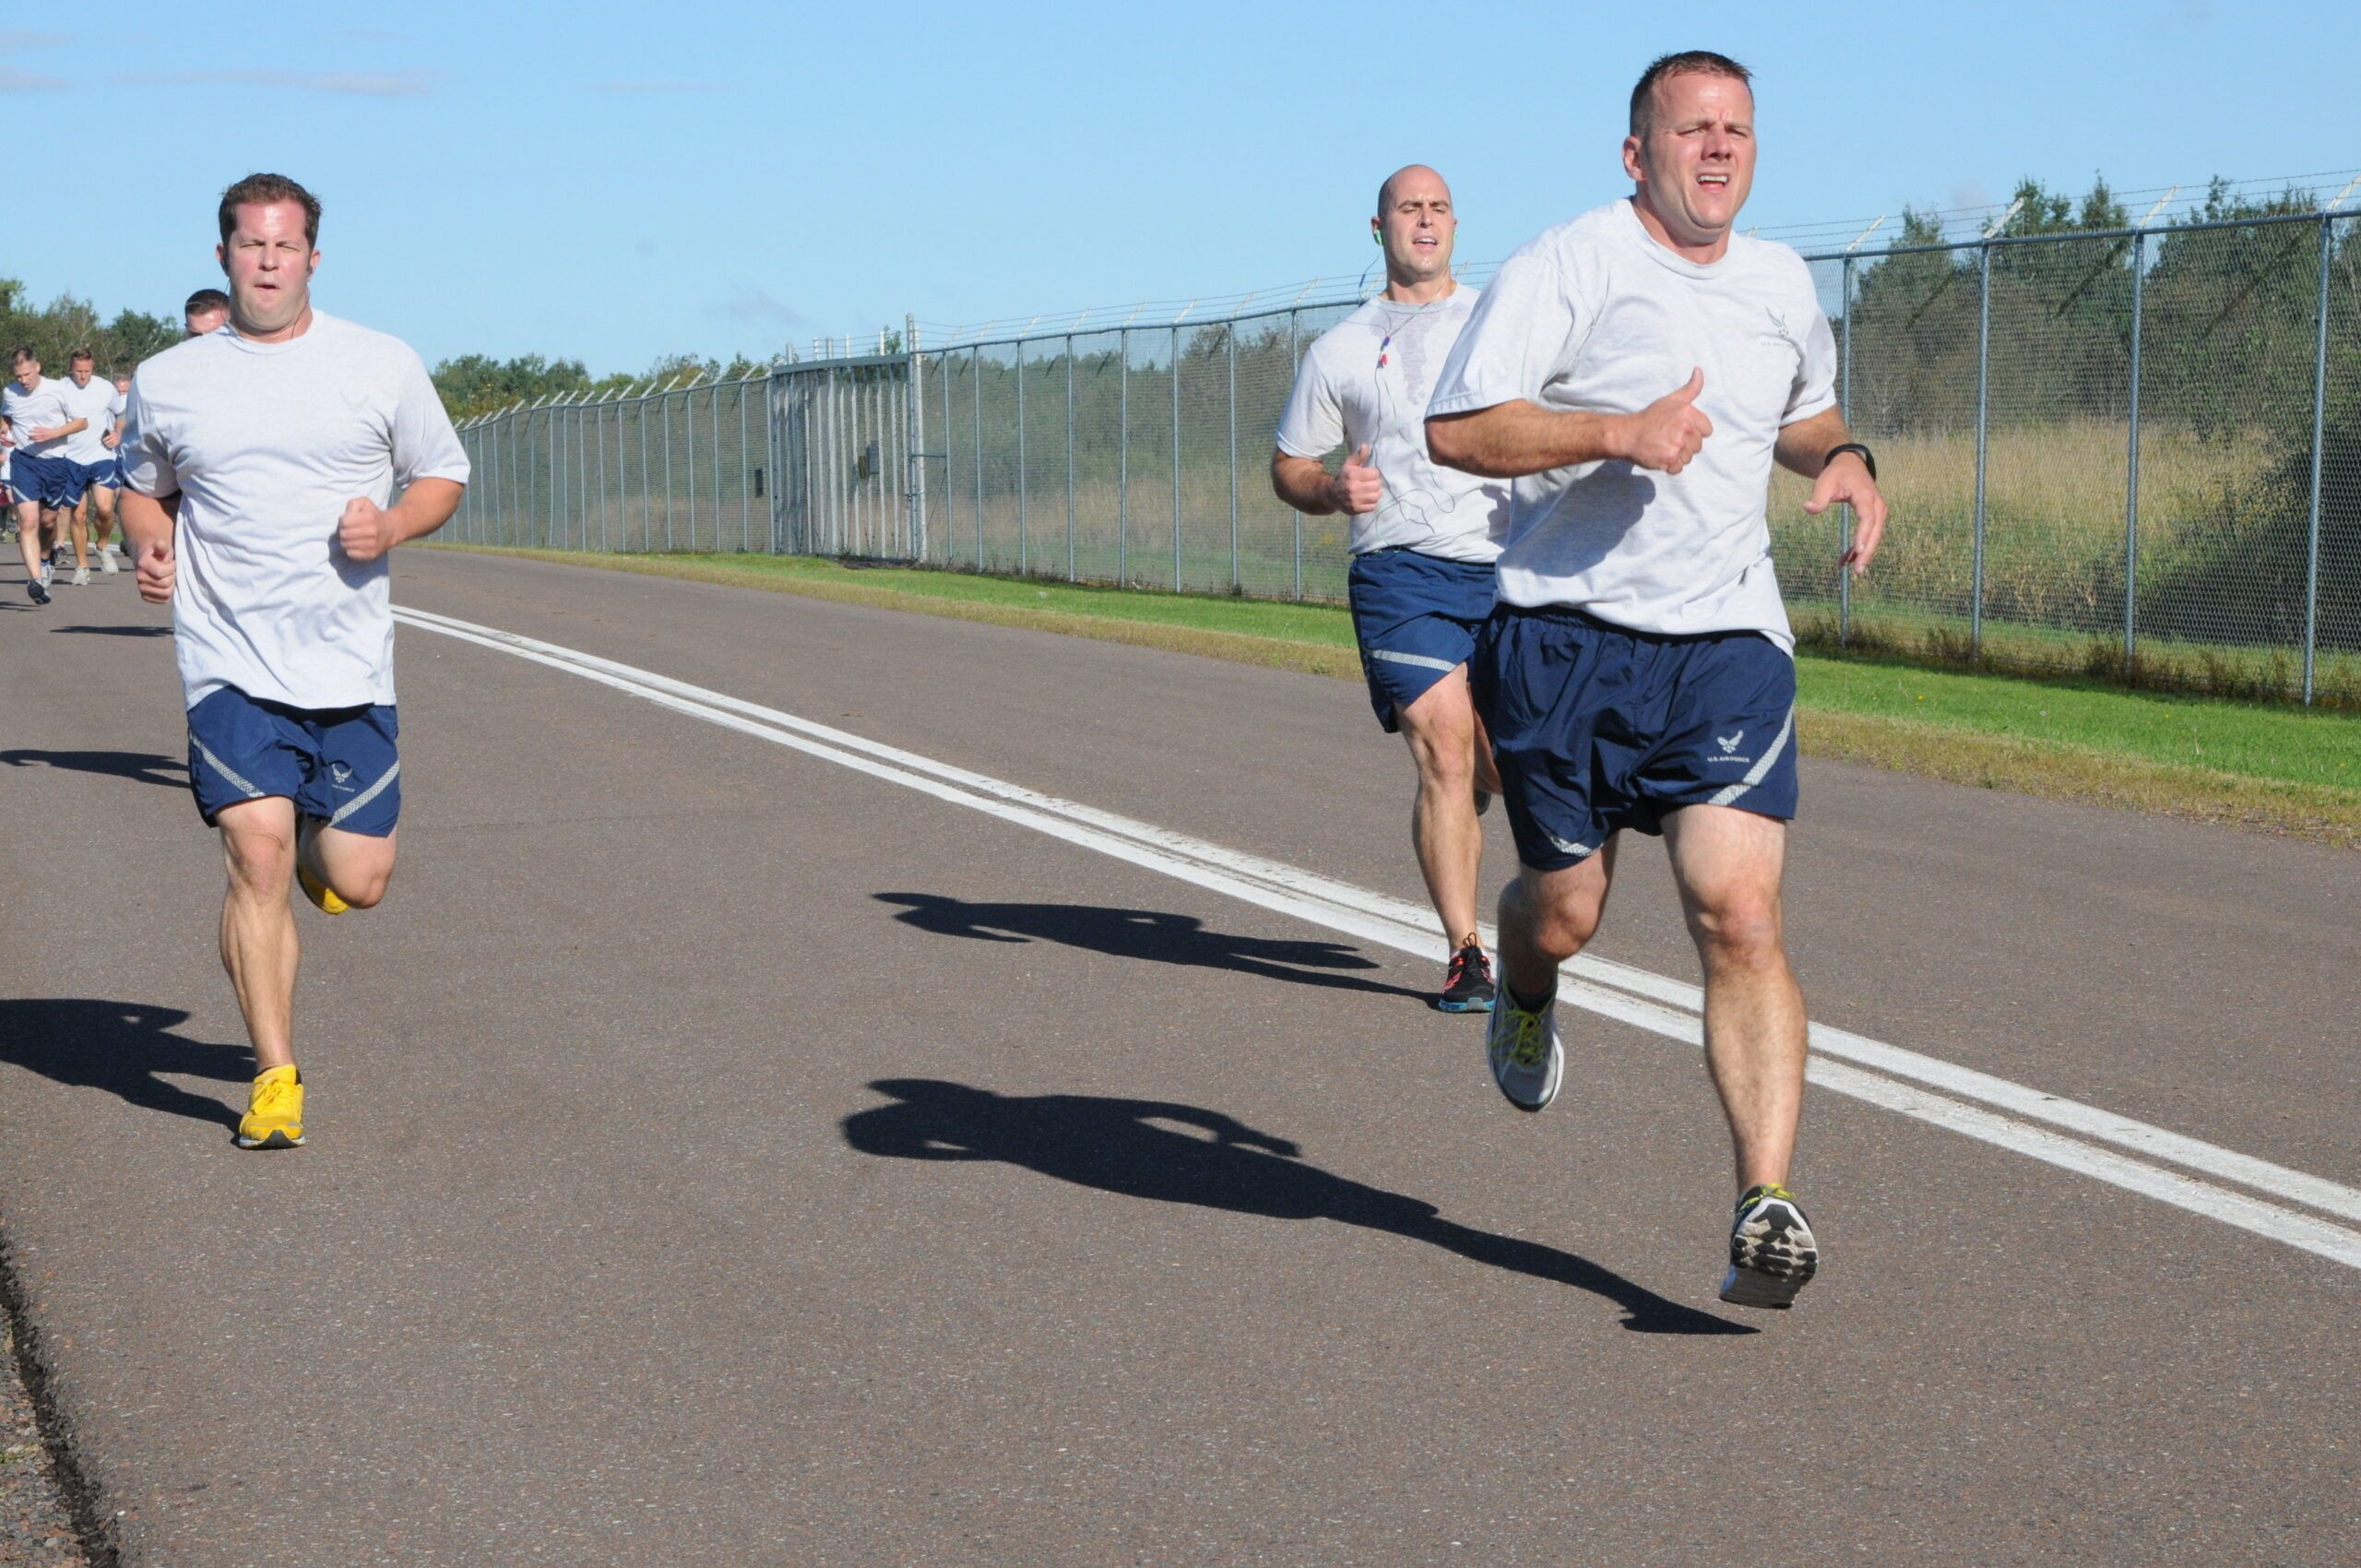 Airmen from the US Airforce running on a running trail in their Physical Training uniform shorts and t-shirt